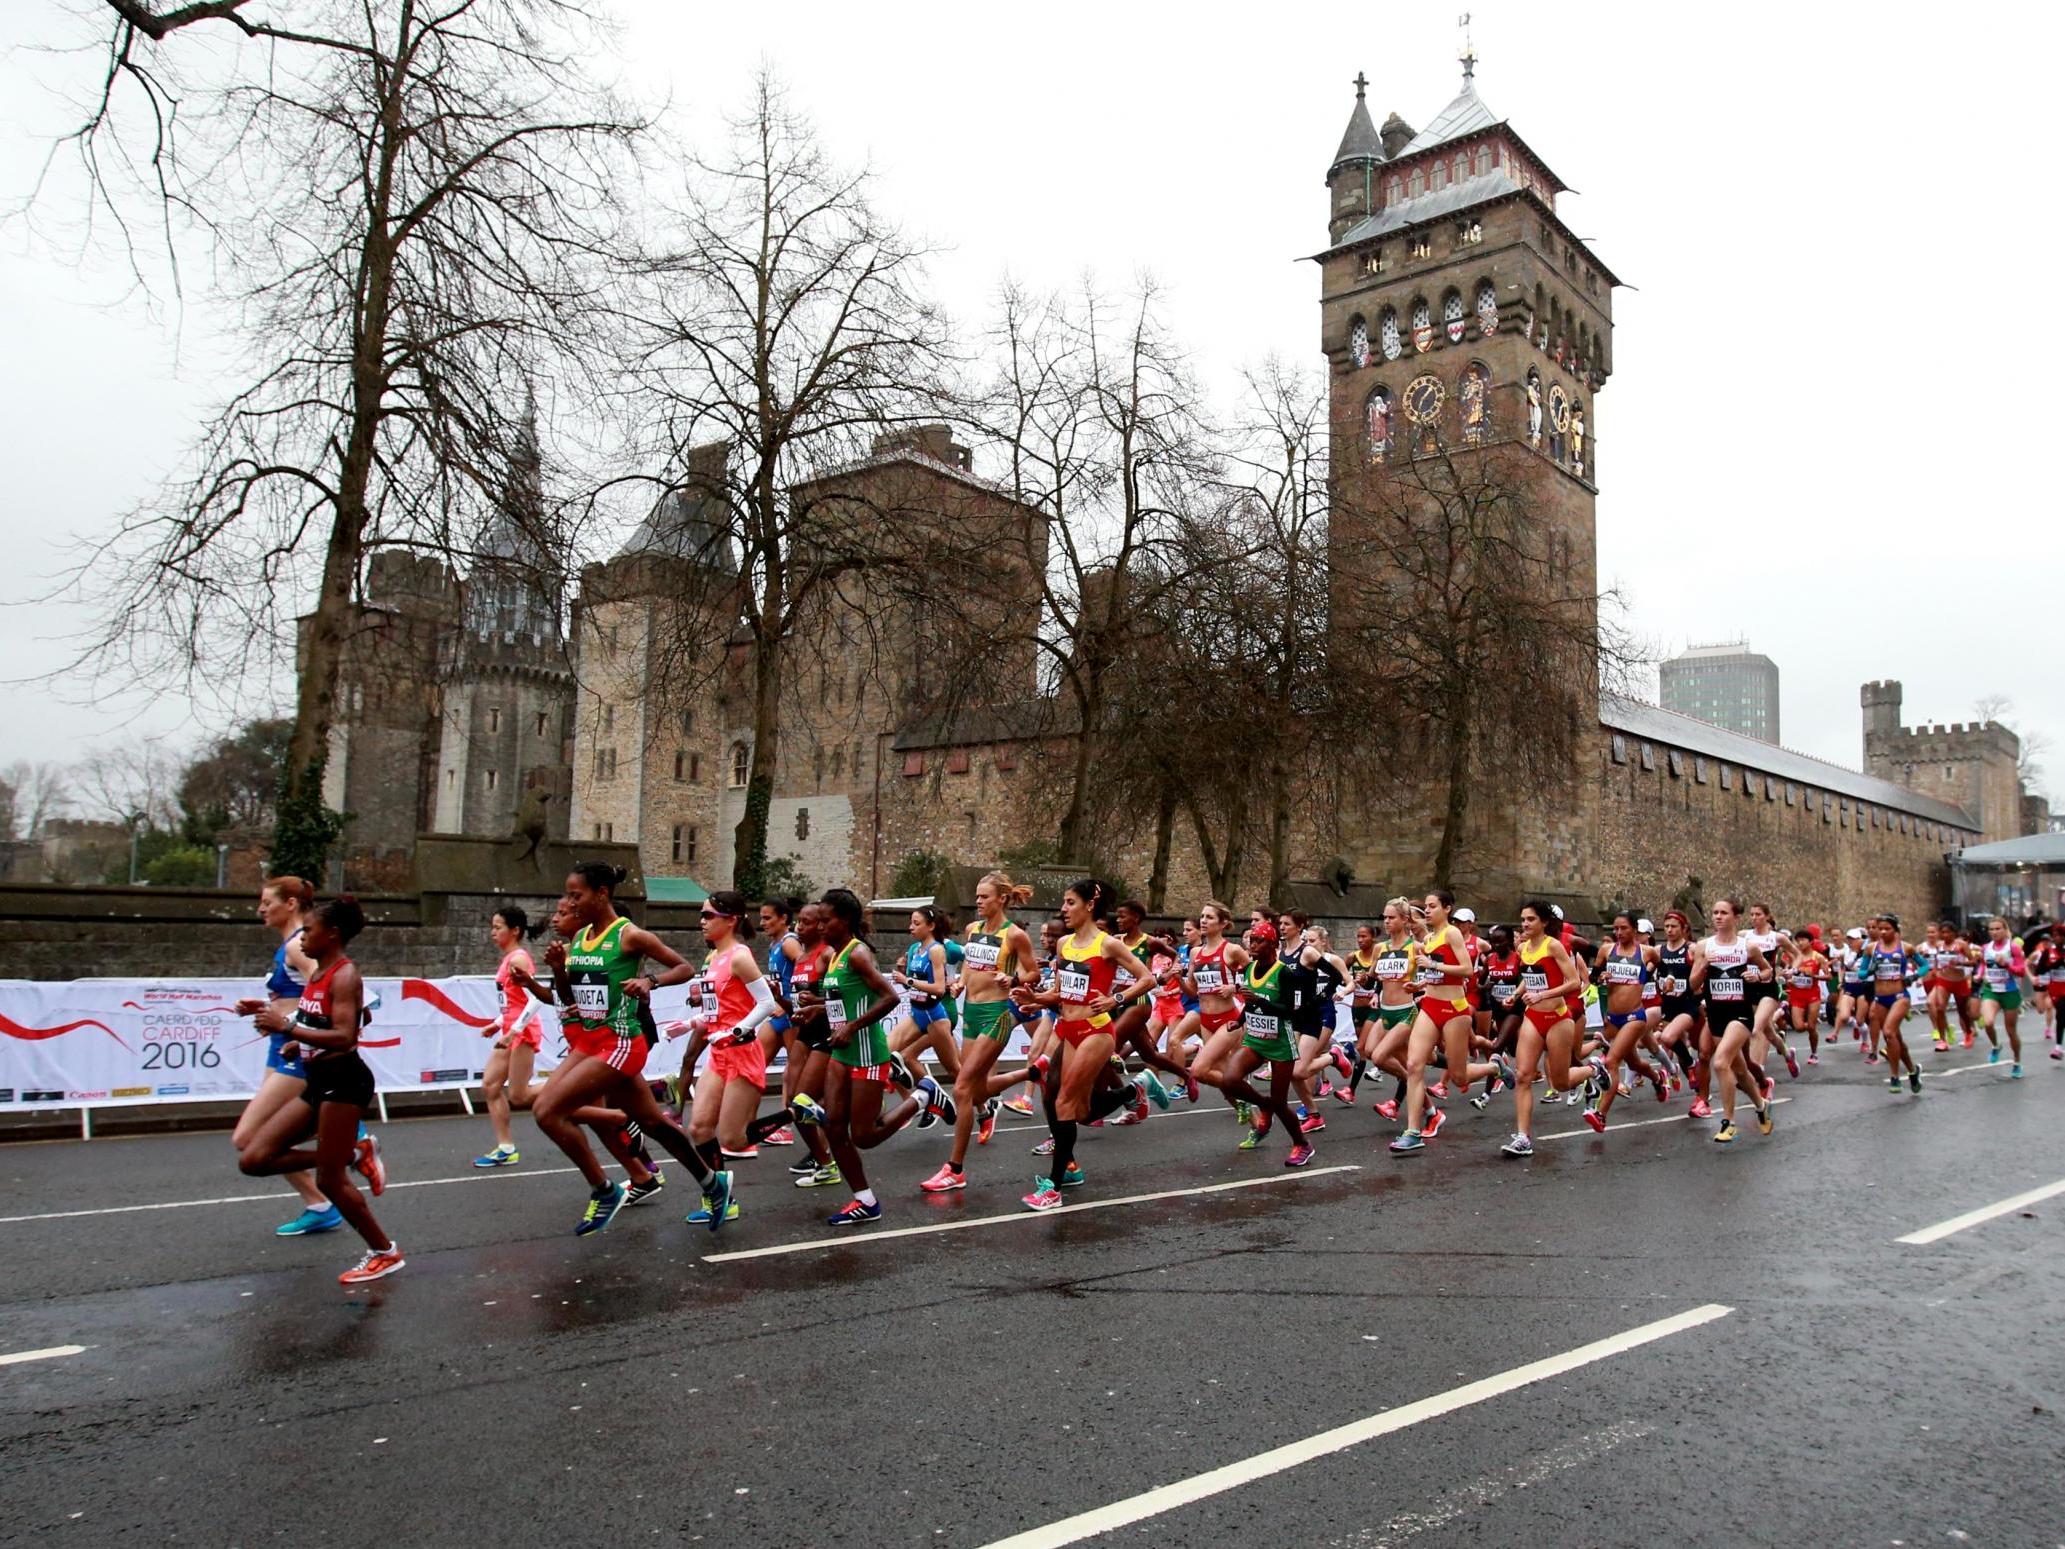 The race is the second-biggest half marathon in the UK